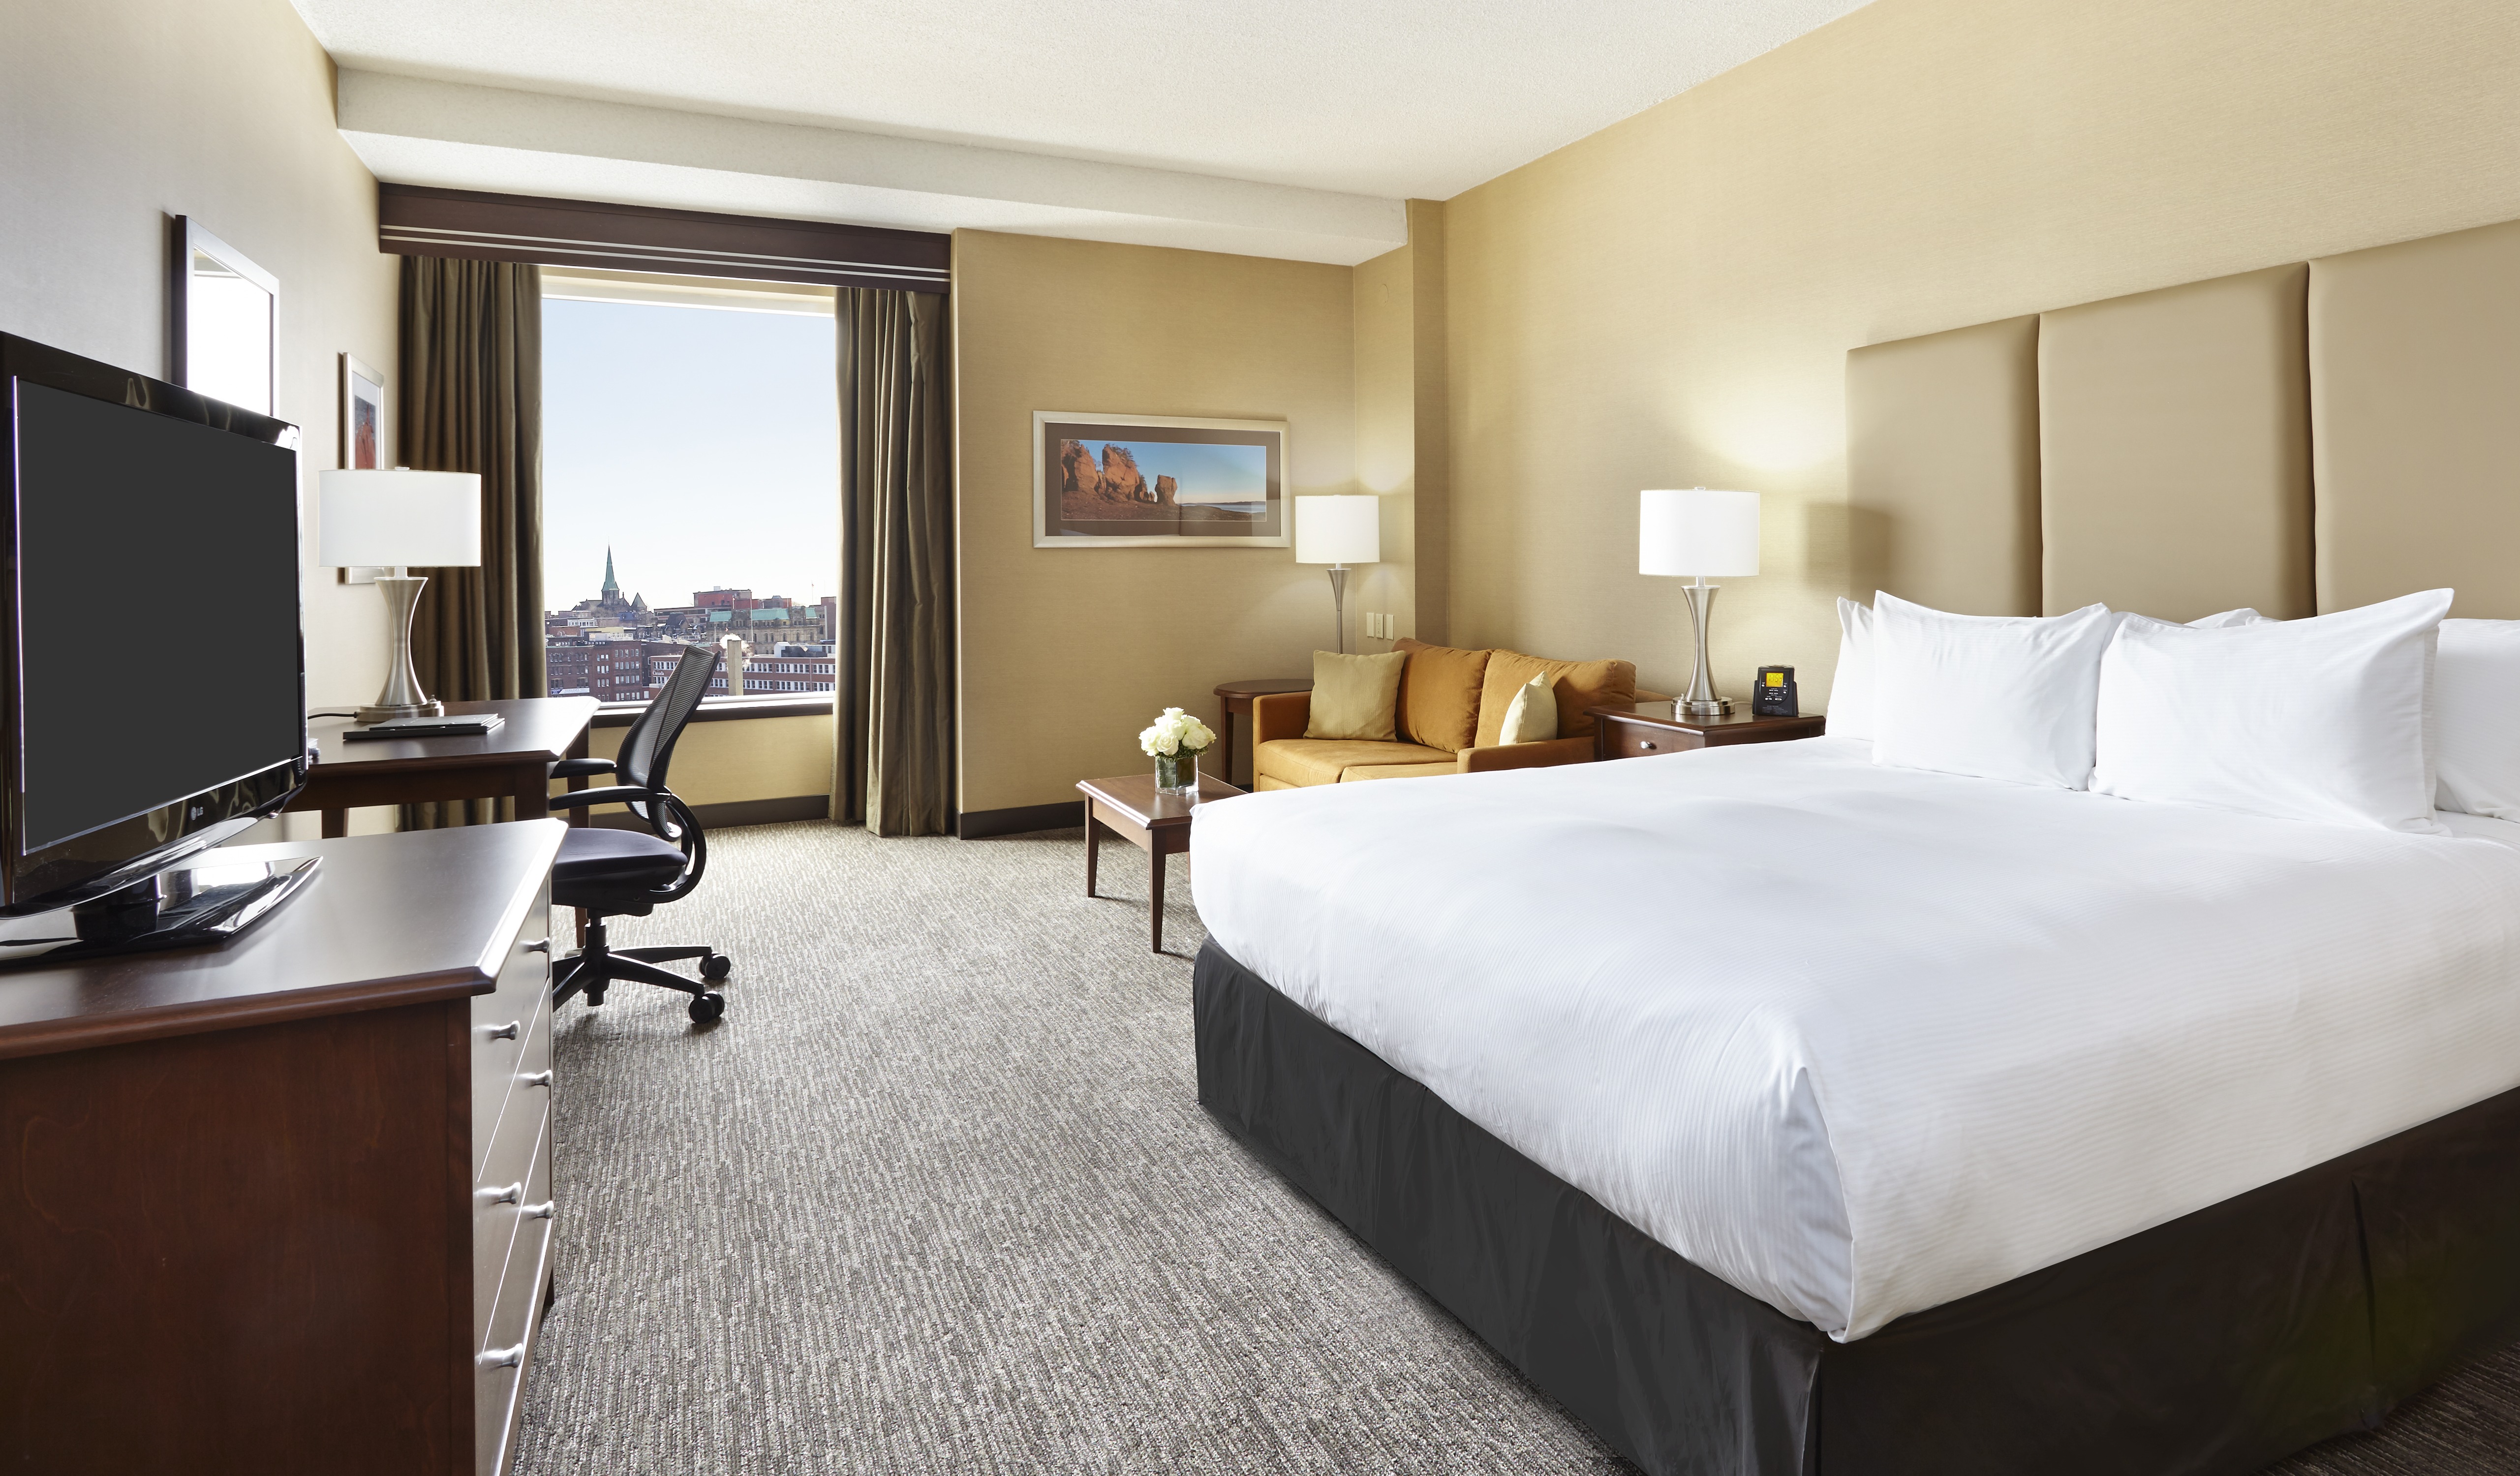 One king bed with city views of Saint John. 